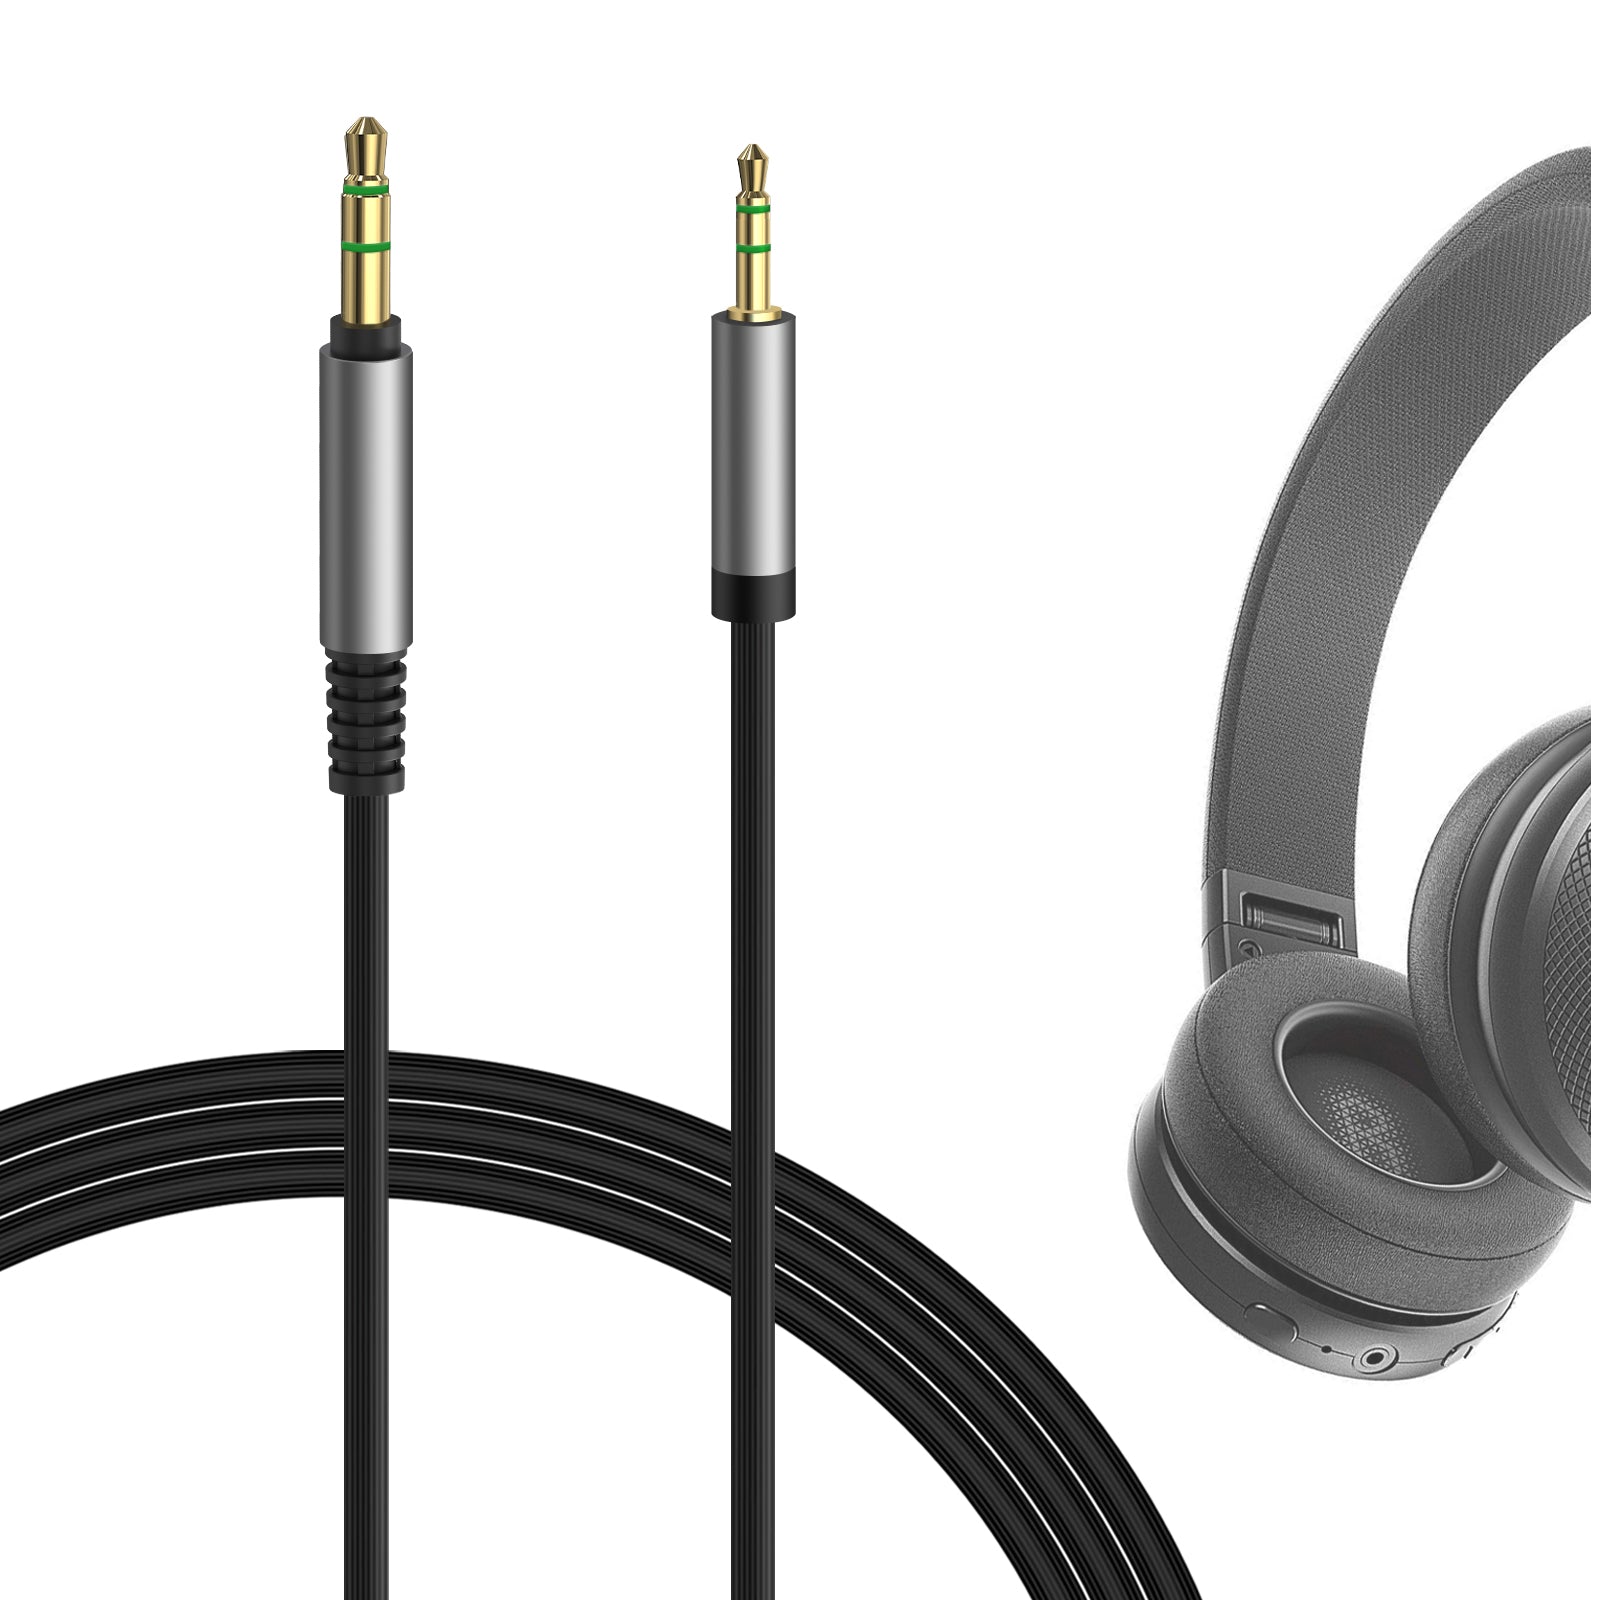 3.5 to 2.5 Aux Cable Jack 3.5 mm to Jack 2.5 mm Audio Cable Jack 3.5 for  Headphone Aux Speaker Connector Cord 2.5 to 3.5